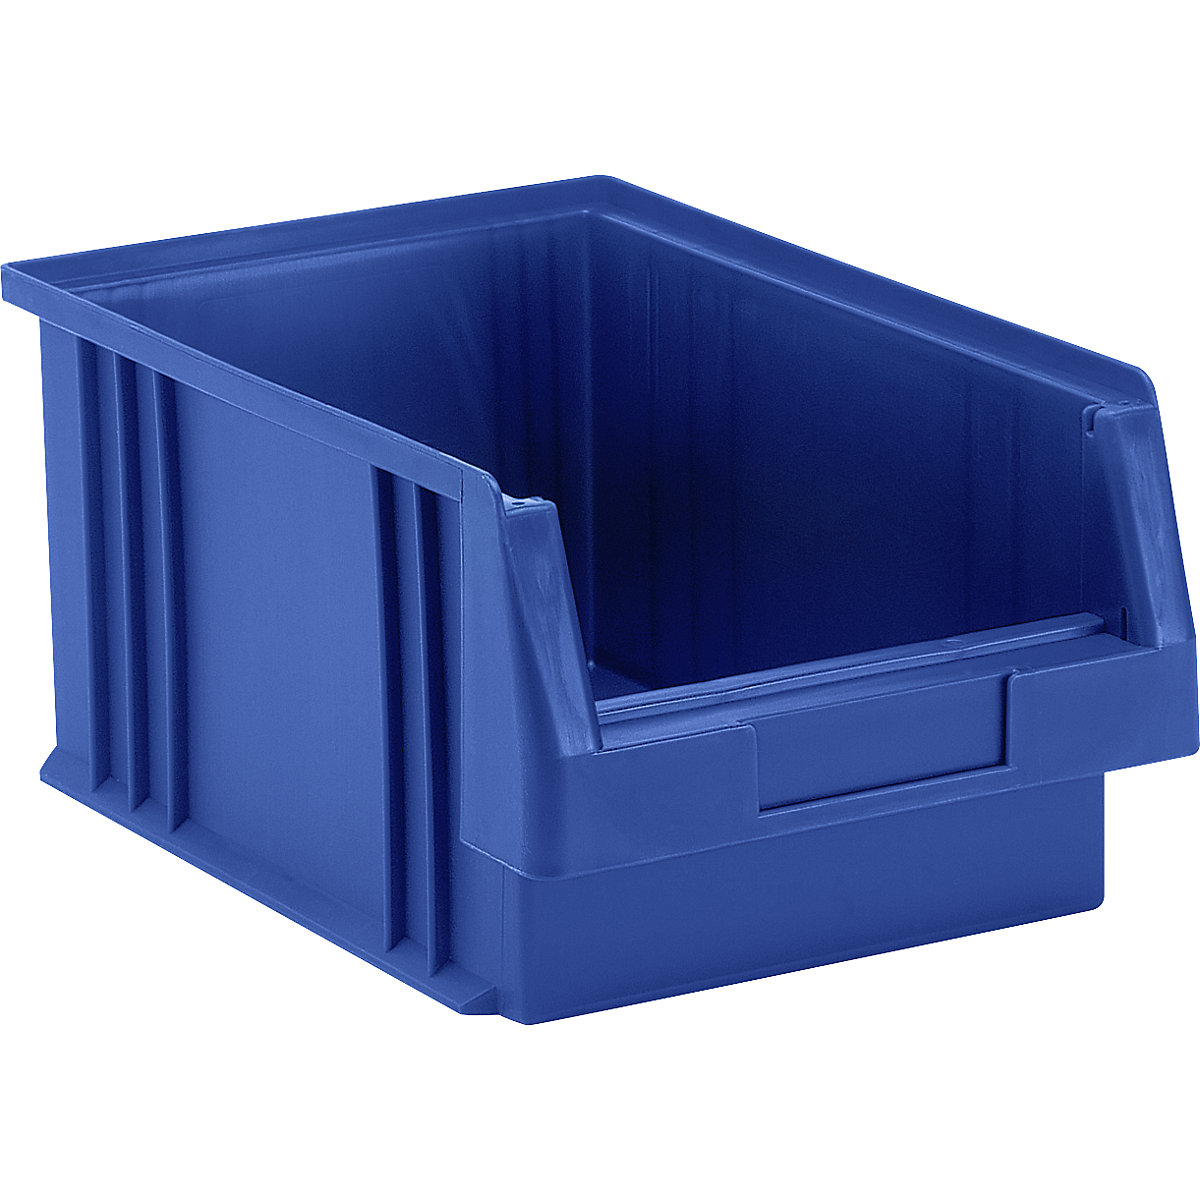 Open fronted storage bin made of polypropylene, 7.4 l capacity, pack of 10, blue-7